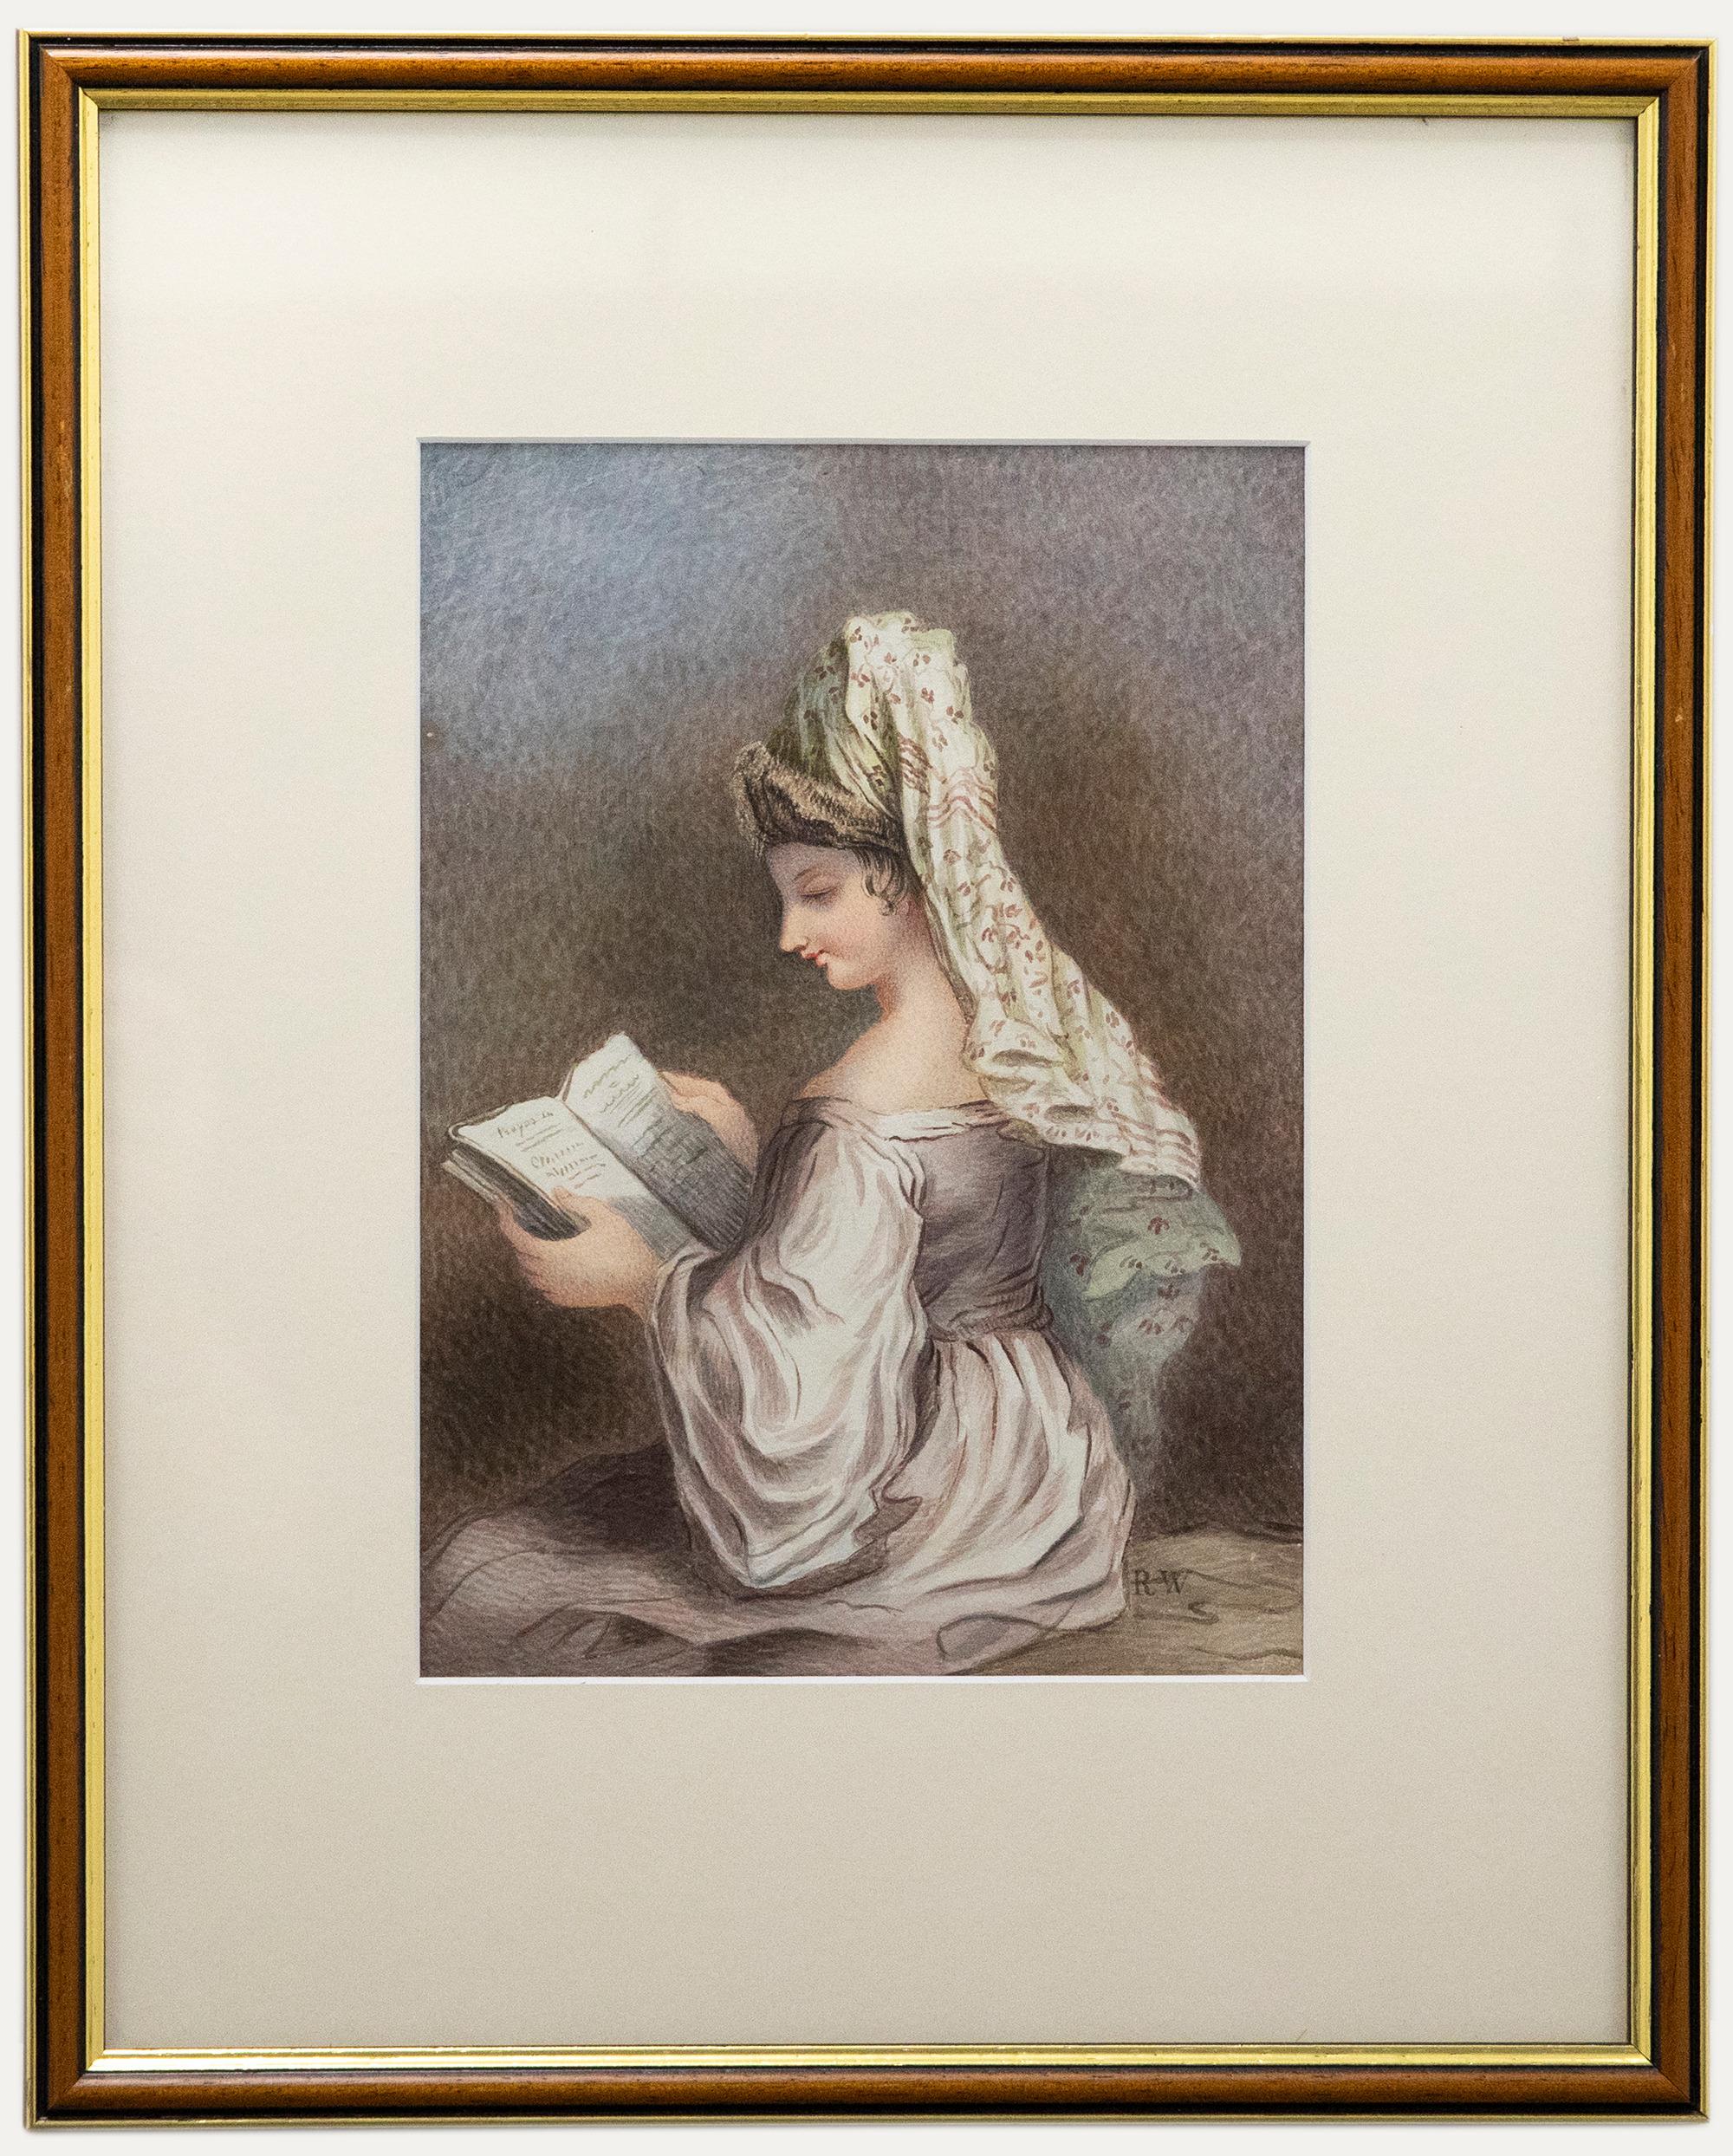 An accomplished watercolour study depicting a women reading a prayer book. The artist captures the woman's elaborate headdress and dress in fine detail. Signed with Westall's monogram to the lower right. Presented in a part gilt frame. On paper.
